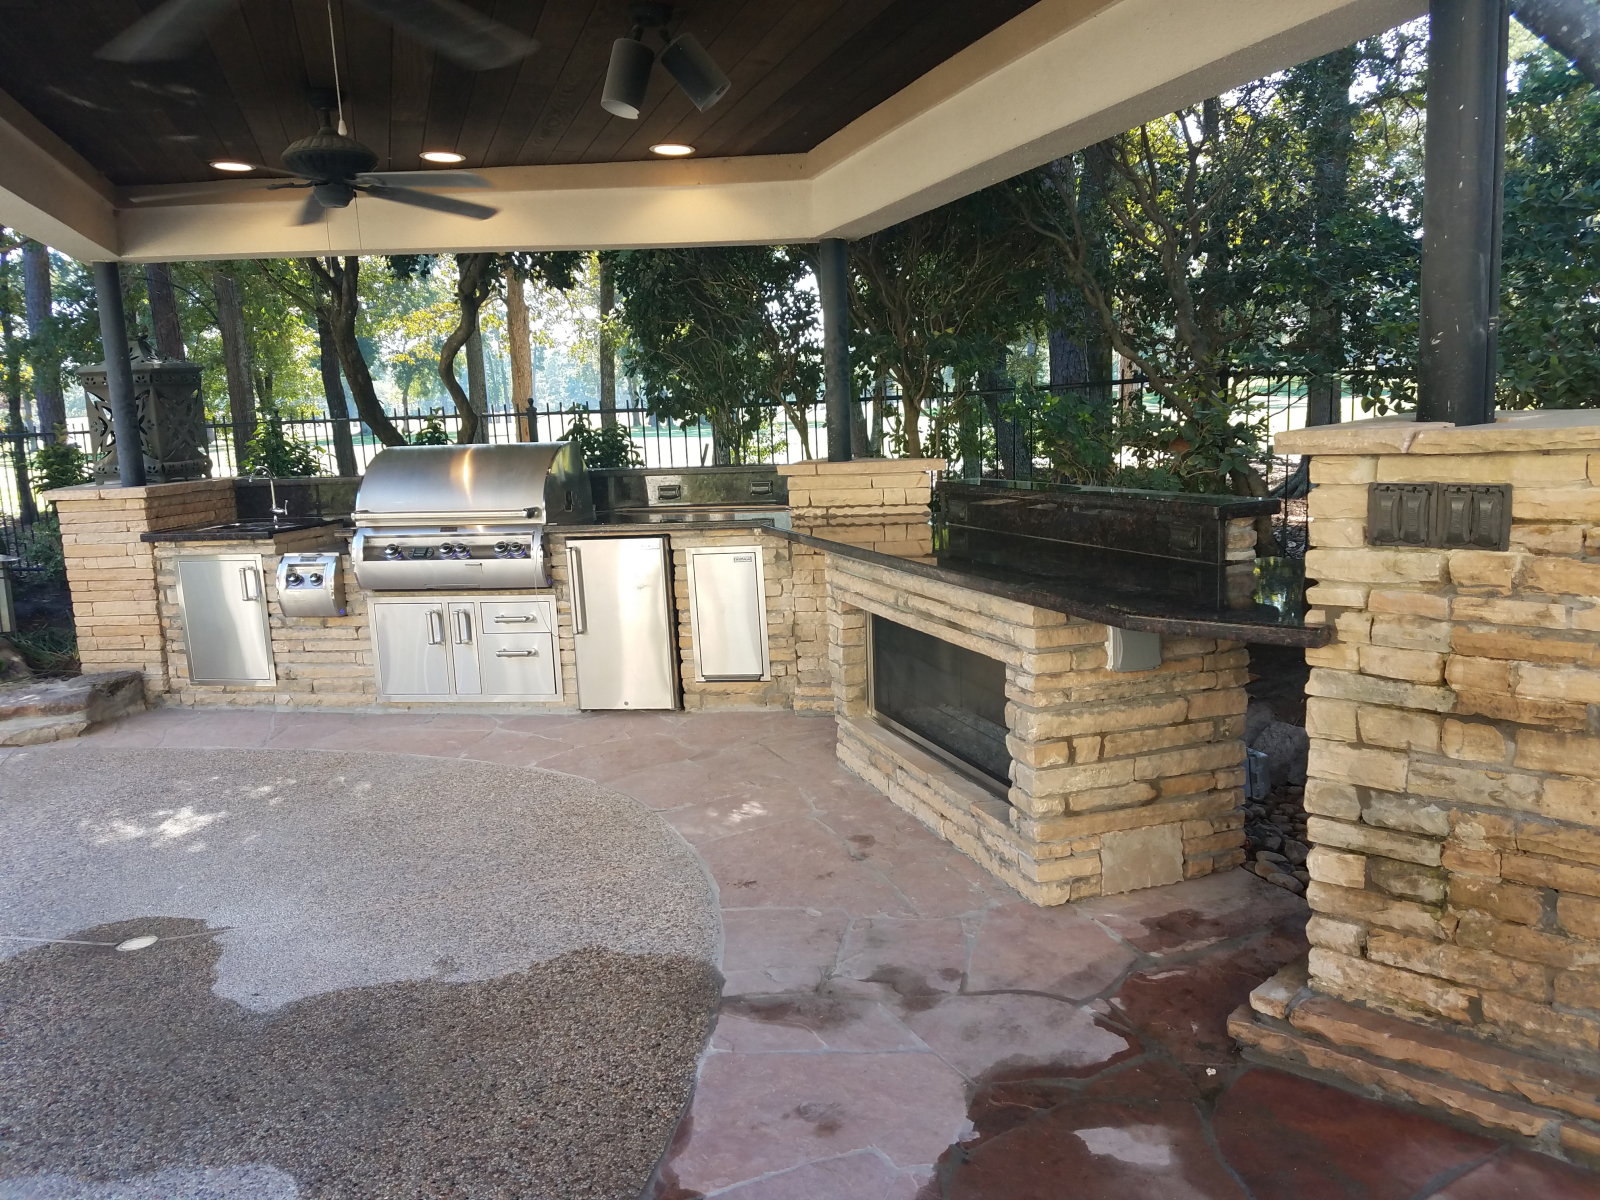 JM-OUTDOOR-LIVINGSummer-kitchen-with-outdoor-fireplace-in-The-Woodlands